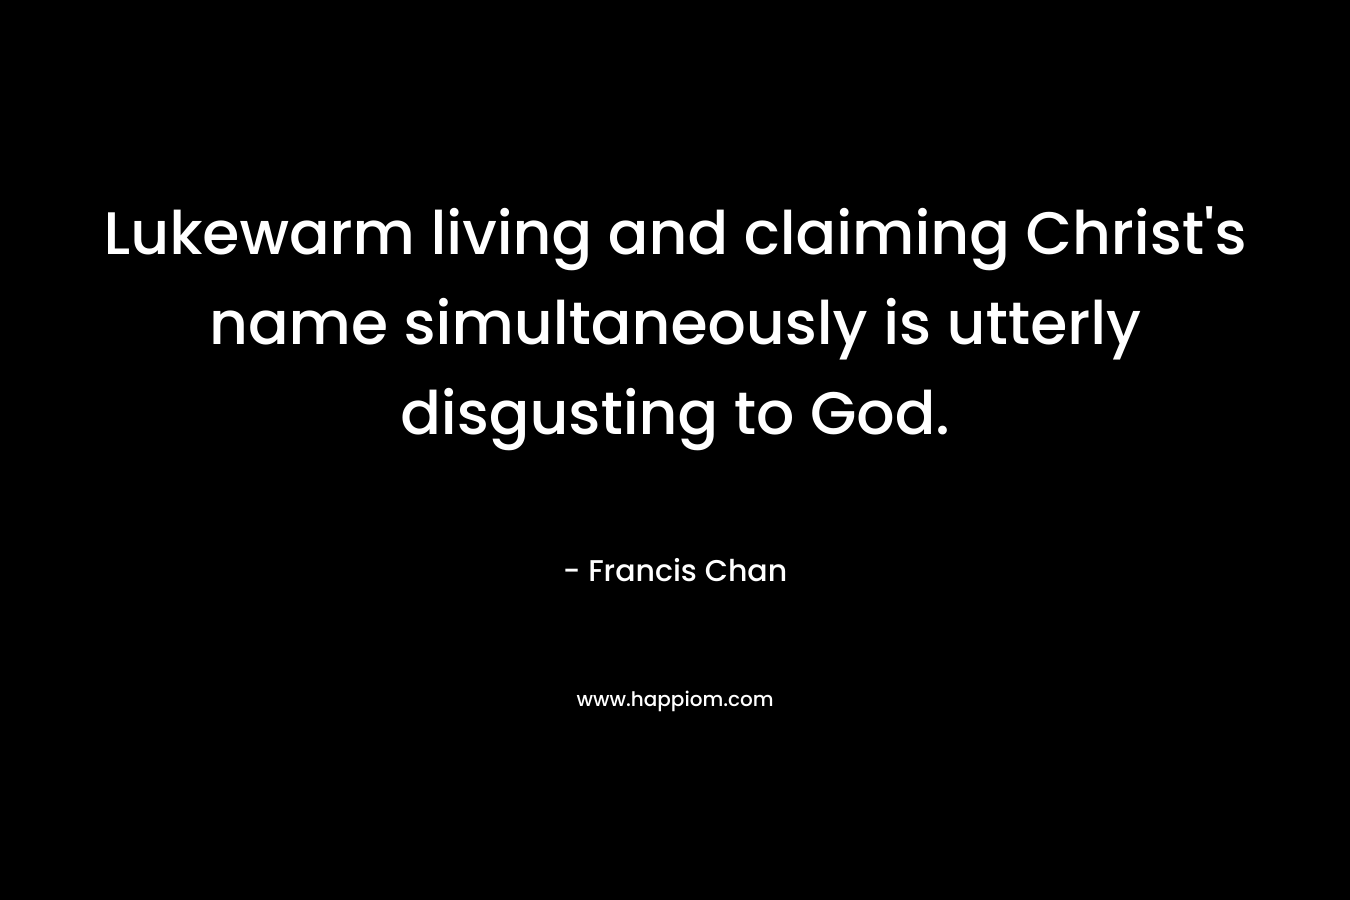 Lukewarm living and claiming Christ’s name simultaneously is utterly disgusting to God. – Francis Chan